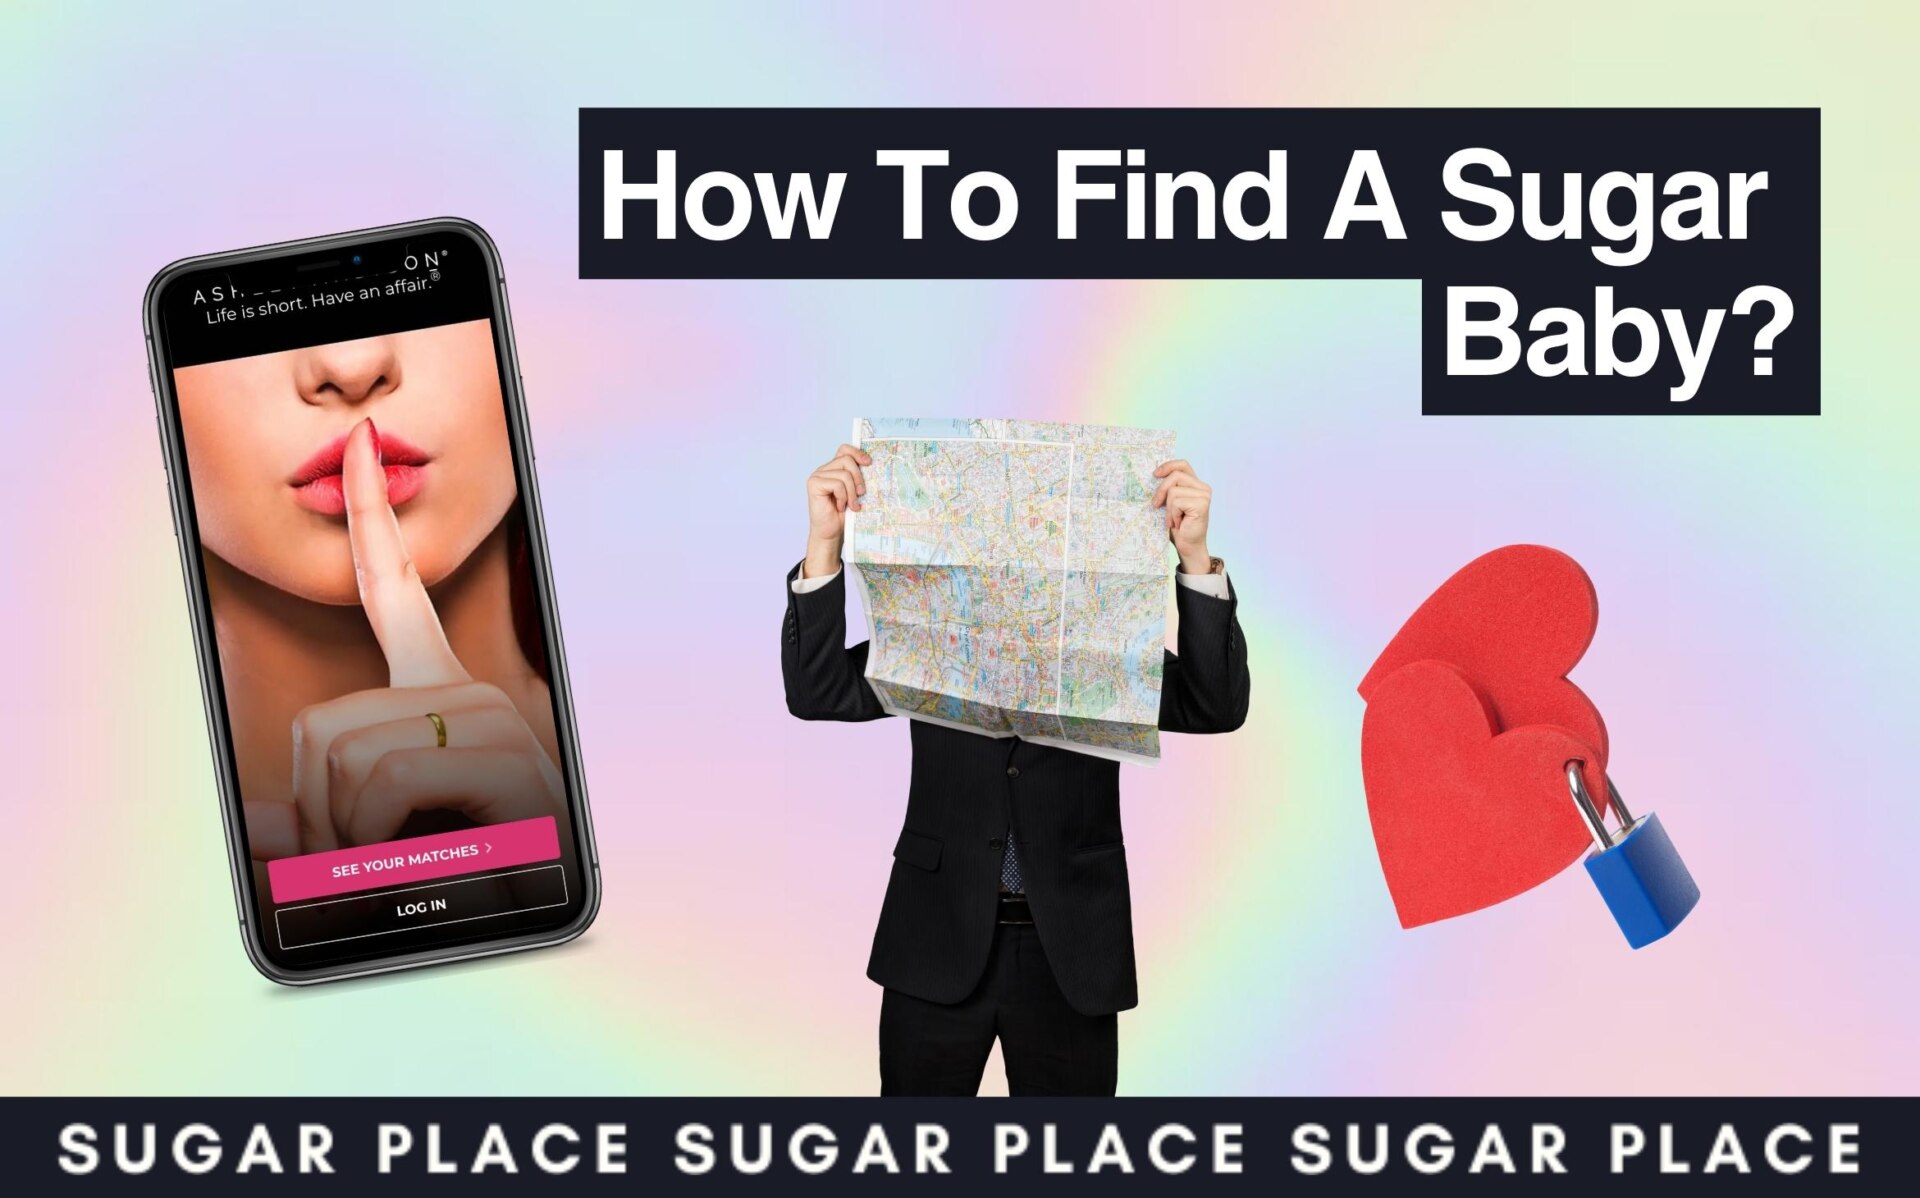 Sugar Baby Wanted: How To Find A Sugar Baby Fast & Easy